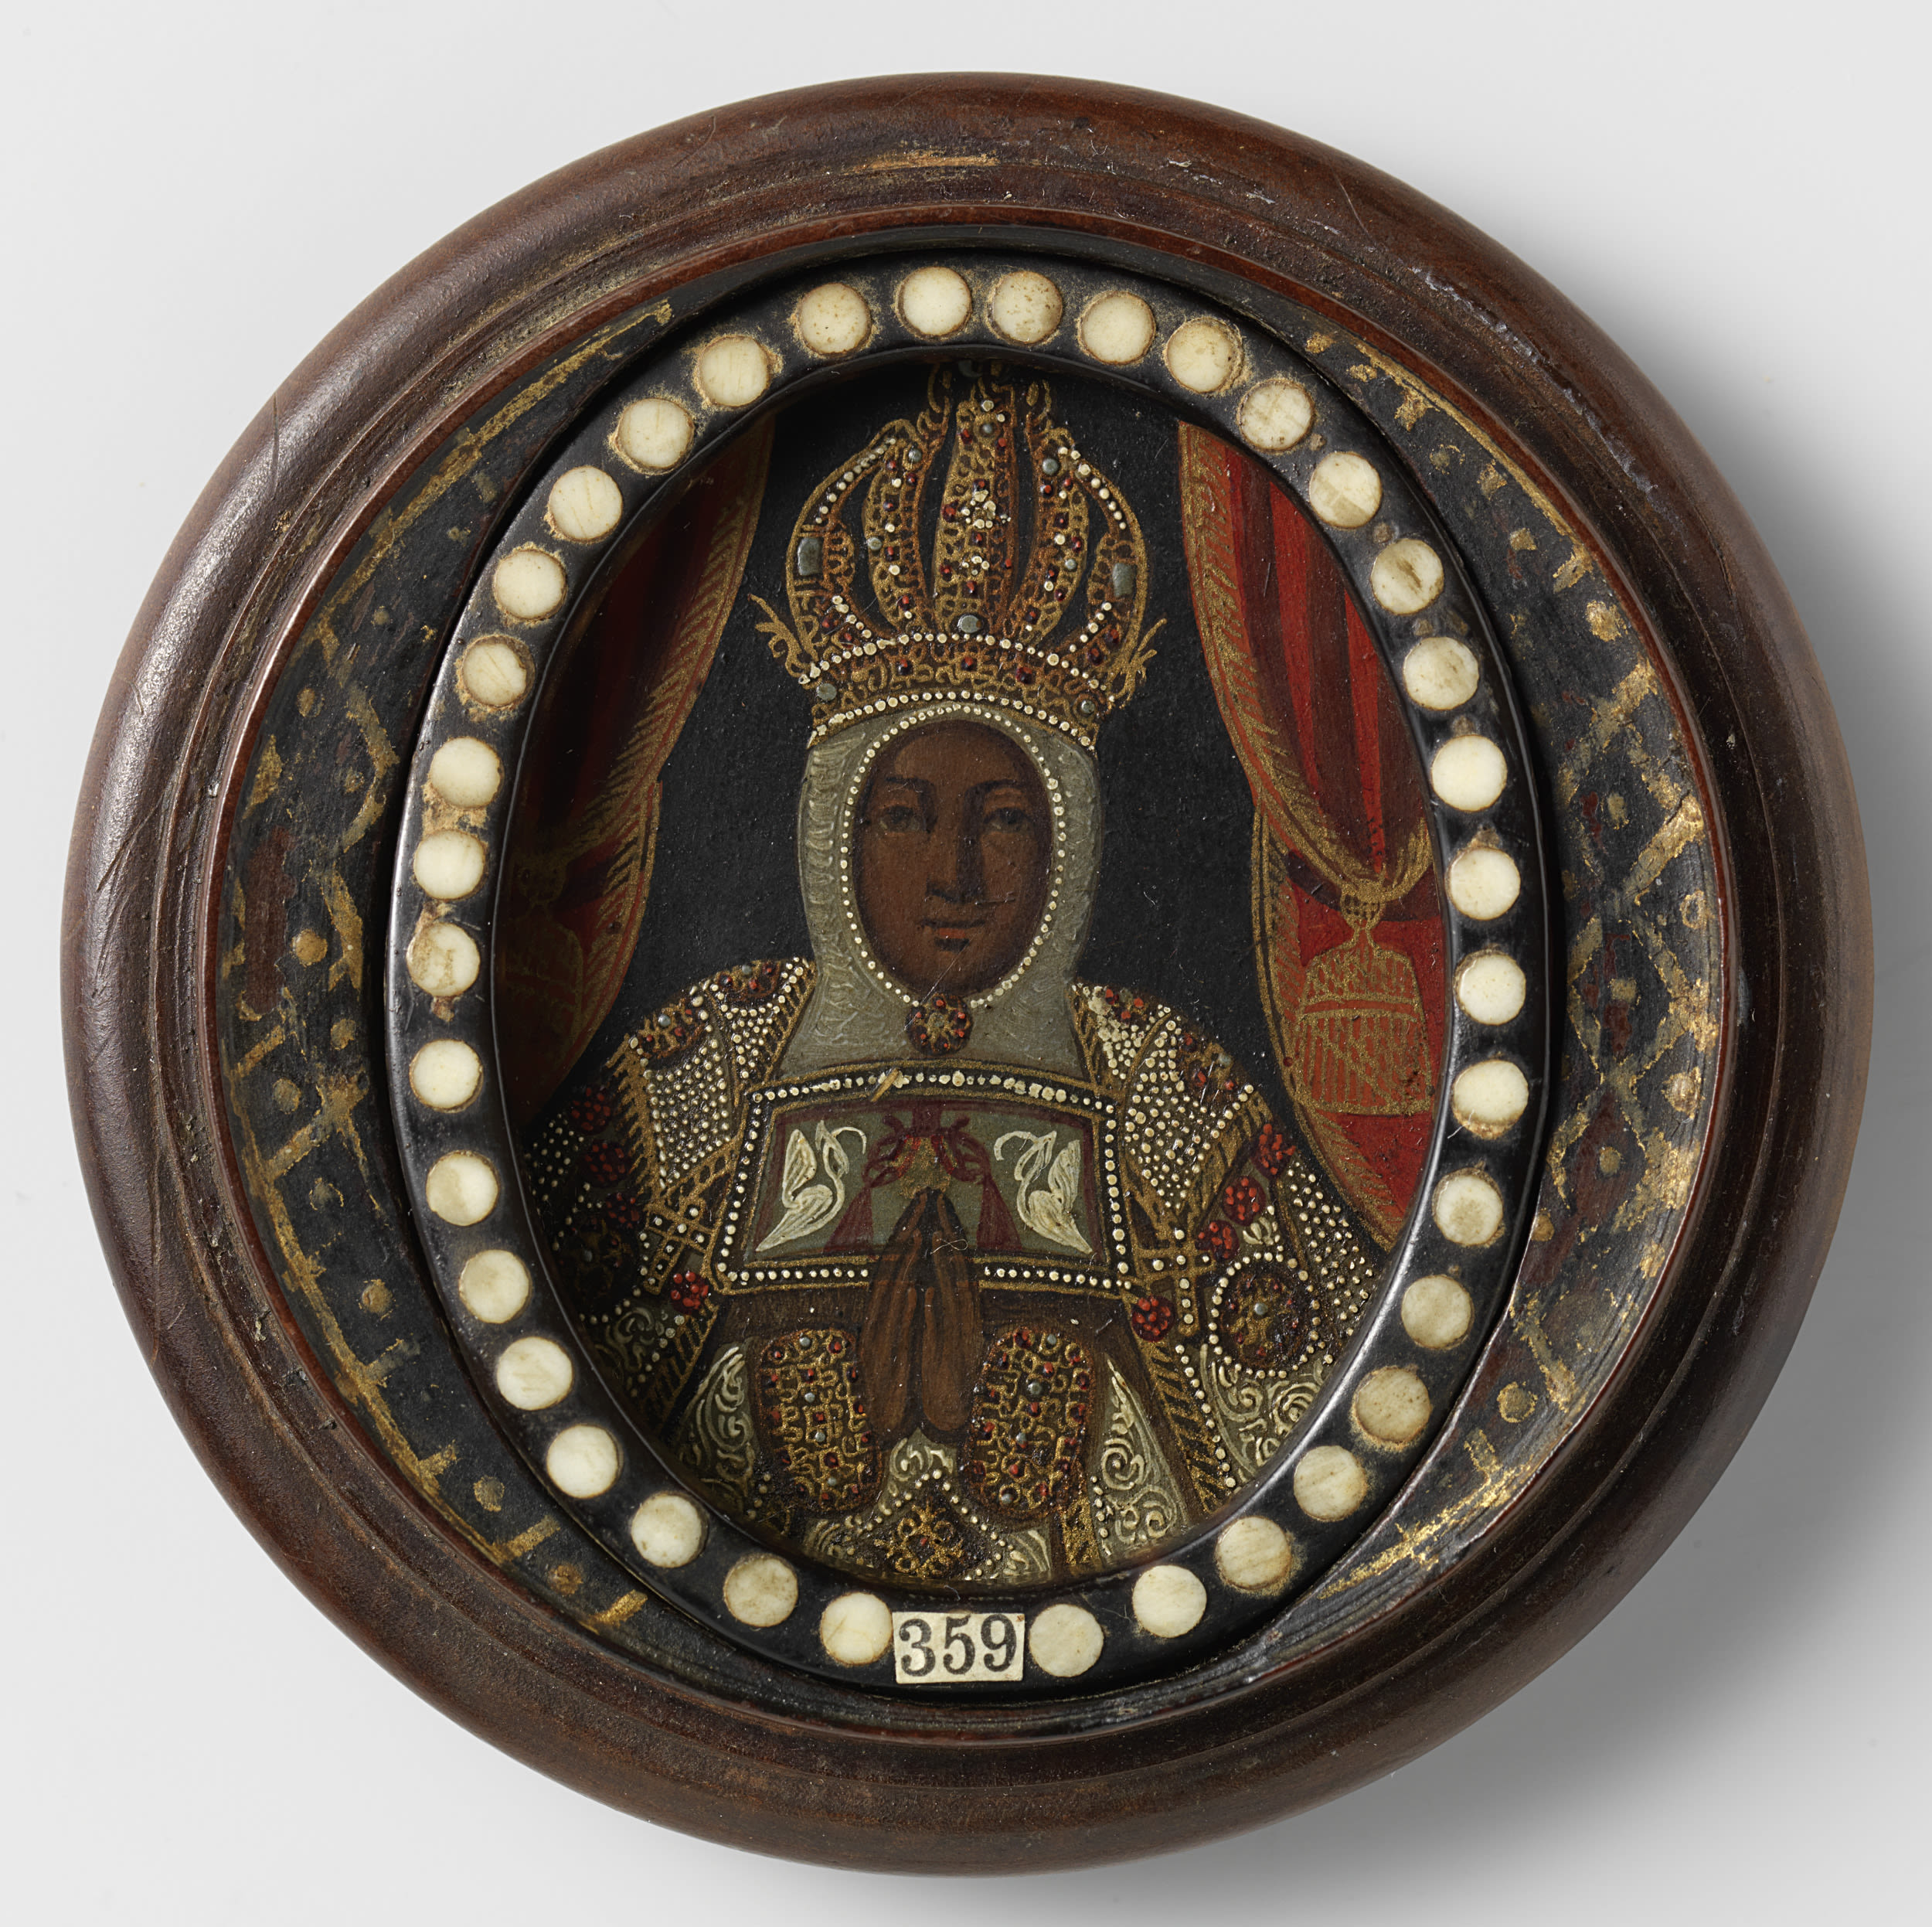 A Black Madonna bust, on the inside of a round wooden box. With an inscription on the inside of the lid.